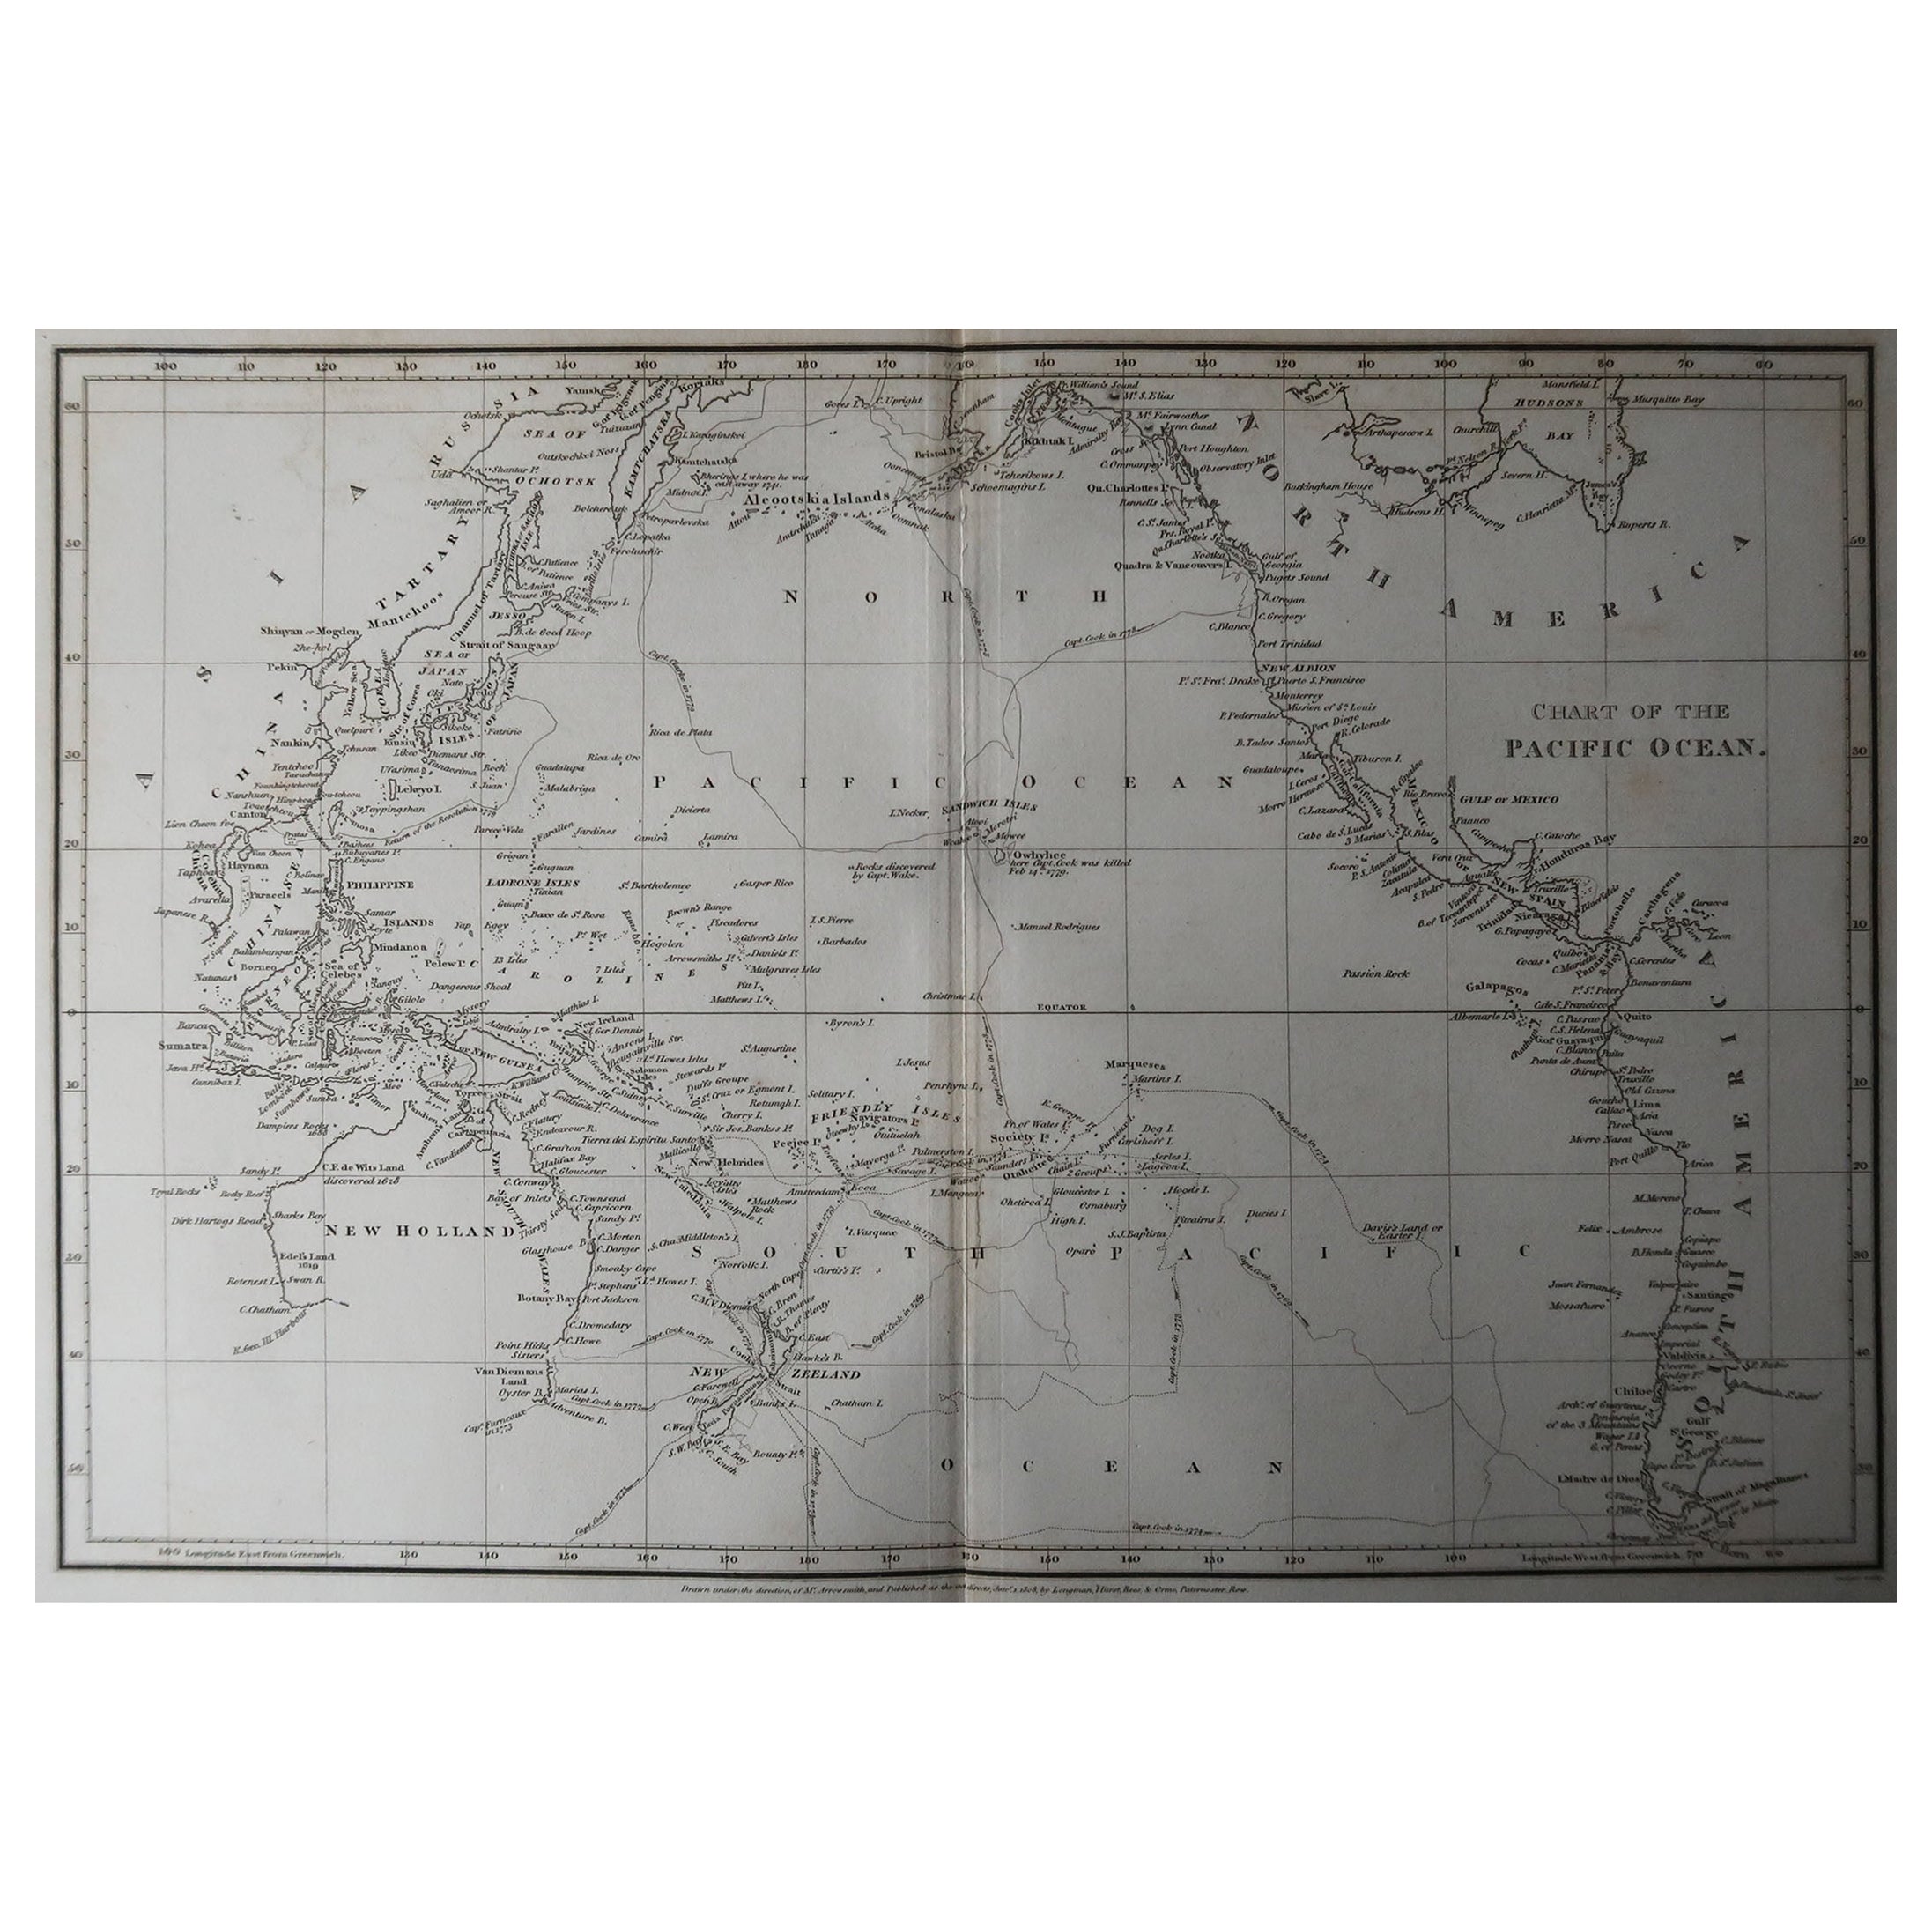 Great map of The Pacific Ocean

Drawn under the direction of Arrowsmith

Copper-plate engraving

Published by Longman, Hurst, Rees, Orme and Brown, 1820

Unframed.